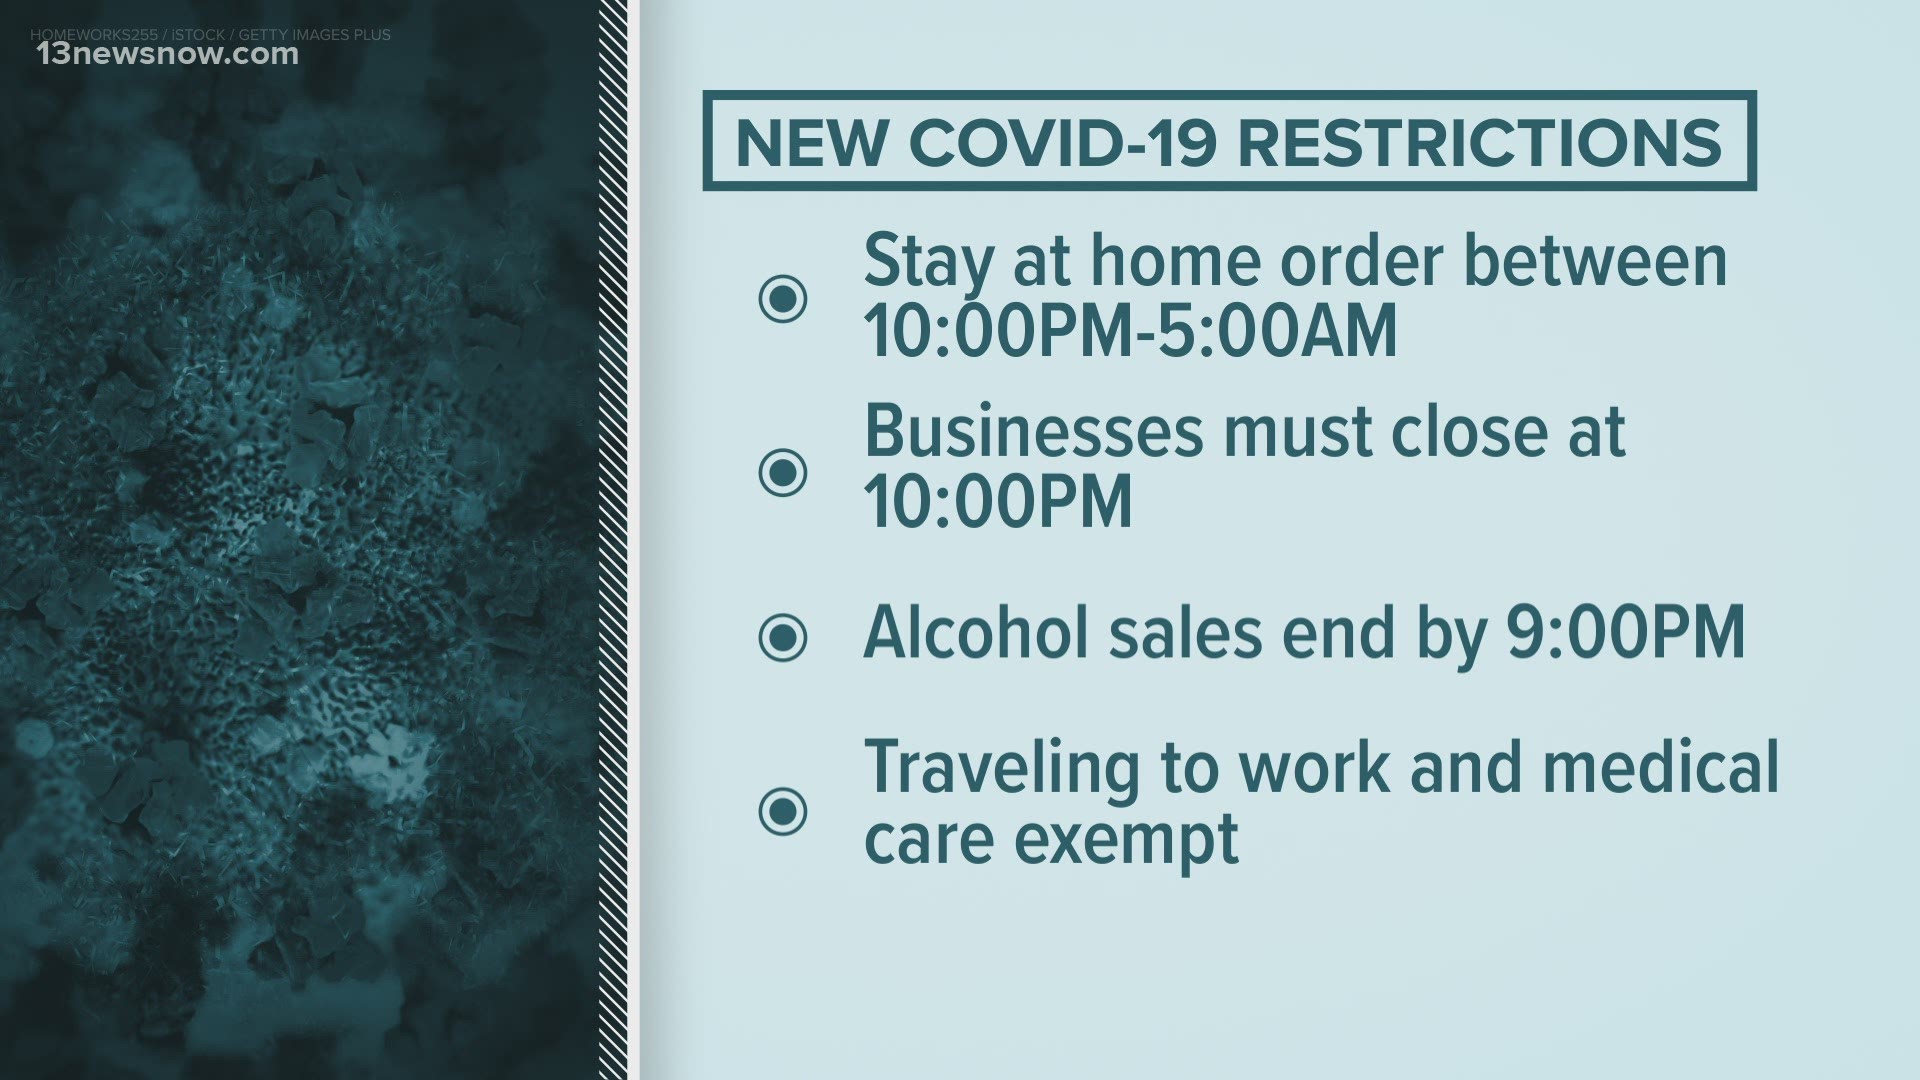 Starting on December 11, Cooper said there would be a modified stay-at-home order that would require people to stay home between the hours of 10 p.m. and 5 a.m.